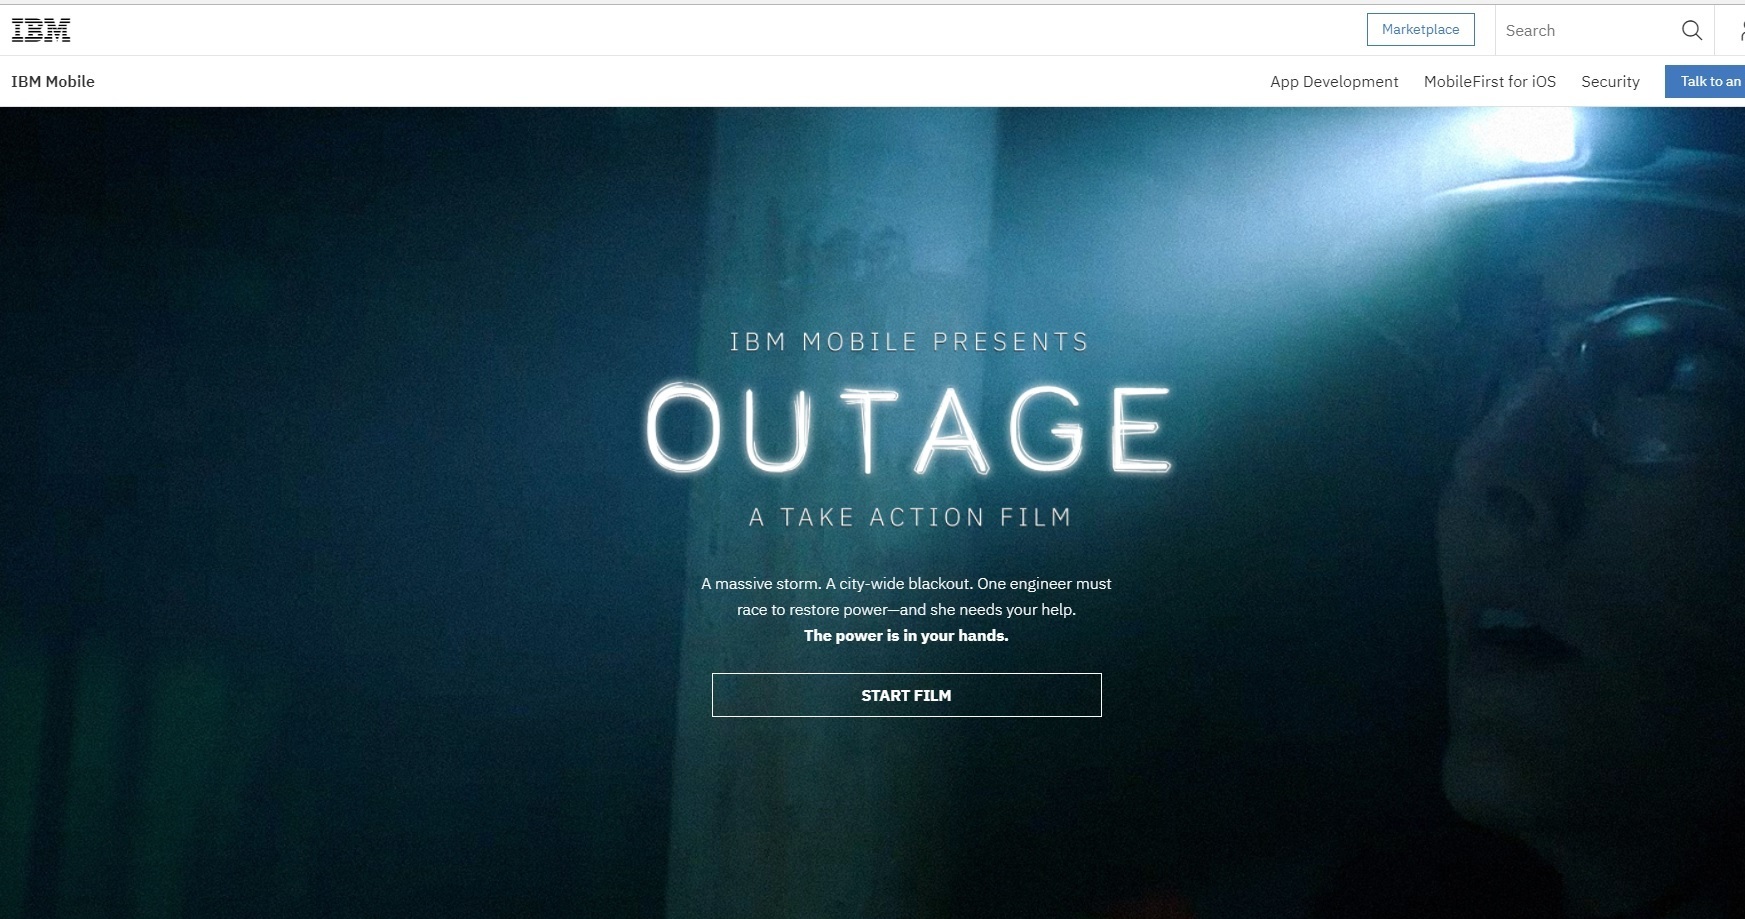 Outage: A Take Action Film by IBM